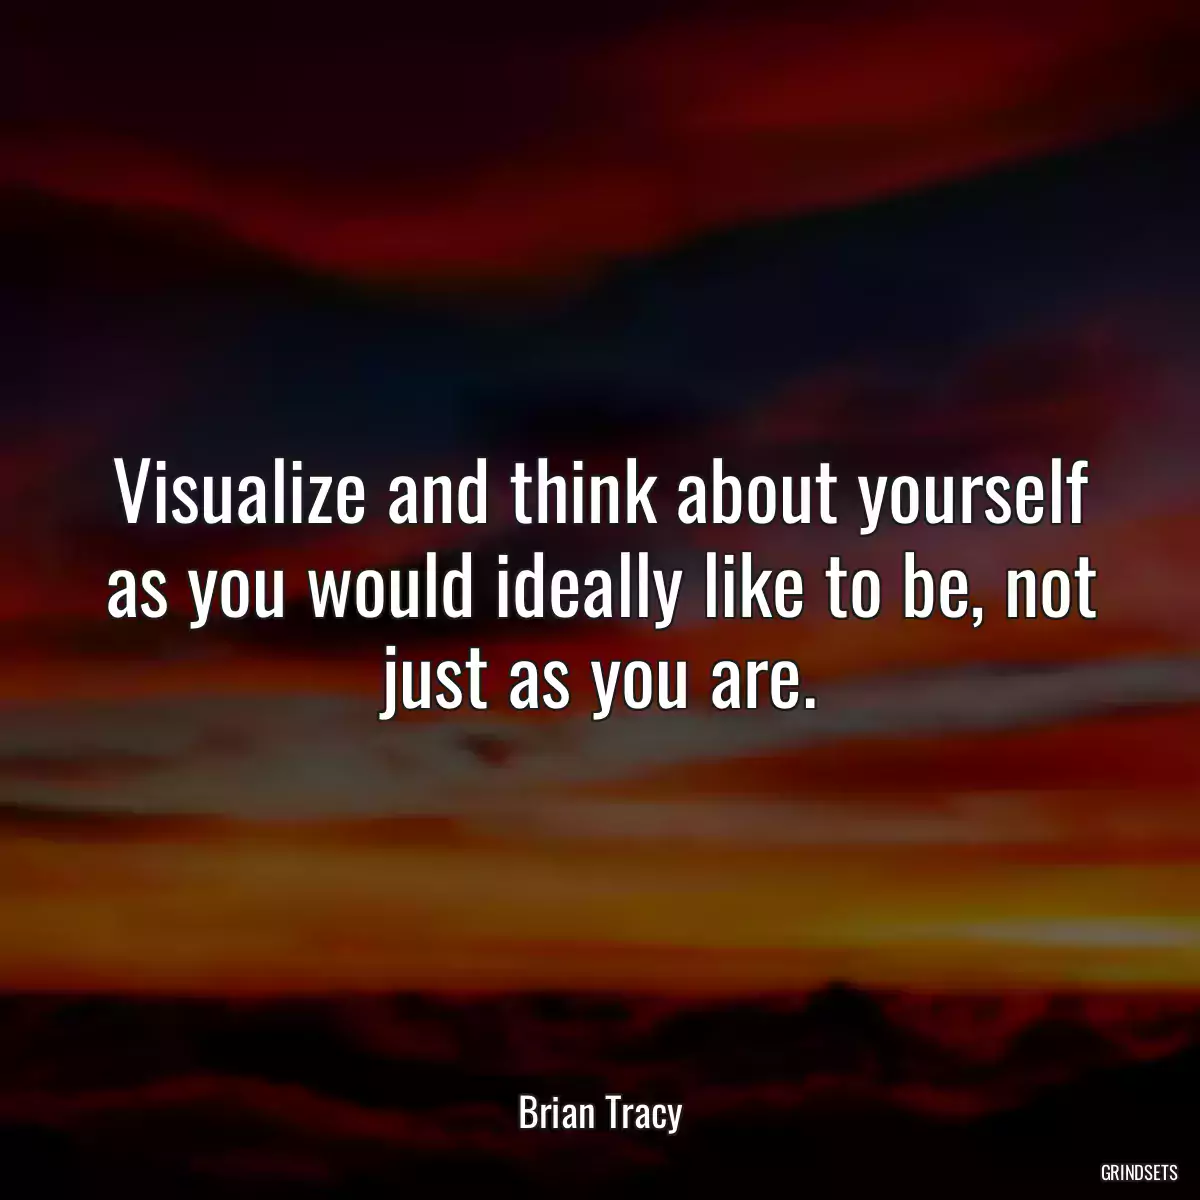 Visualize and think about yourself as you would ideally like to be, not just as you are.